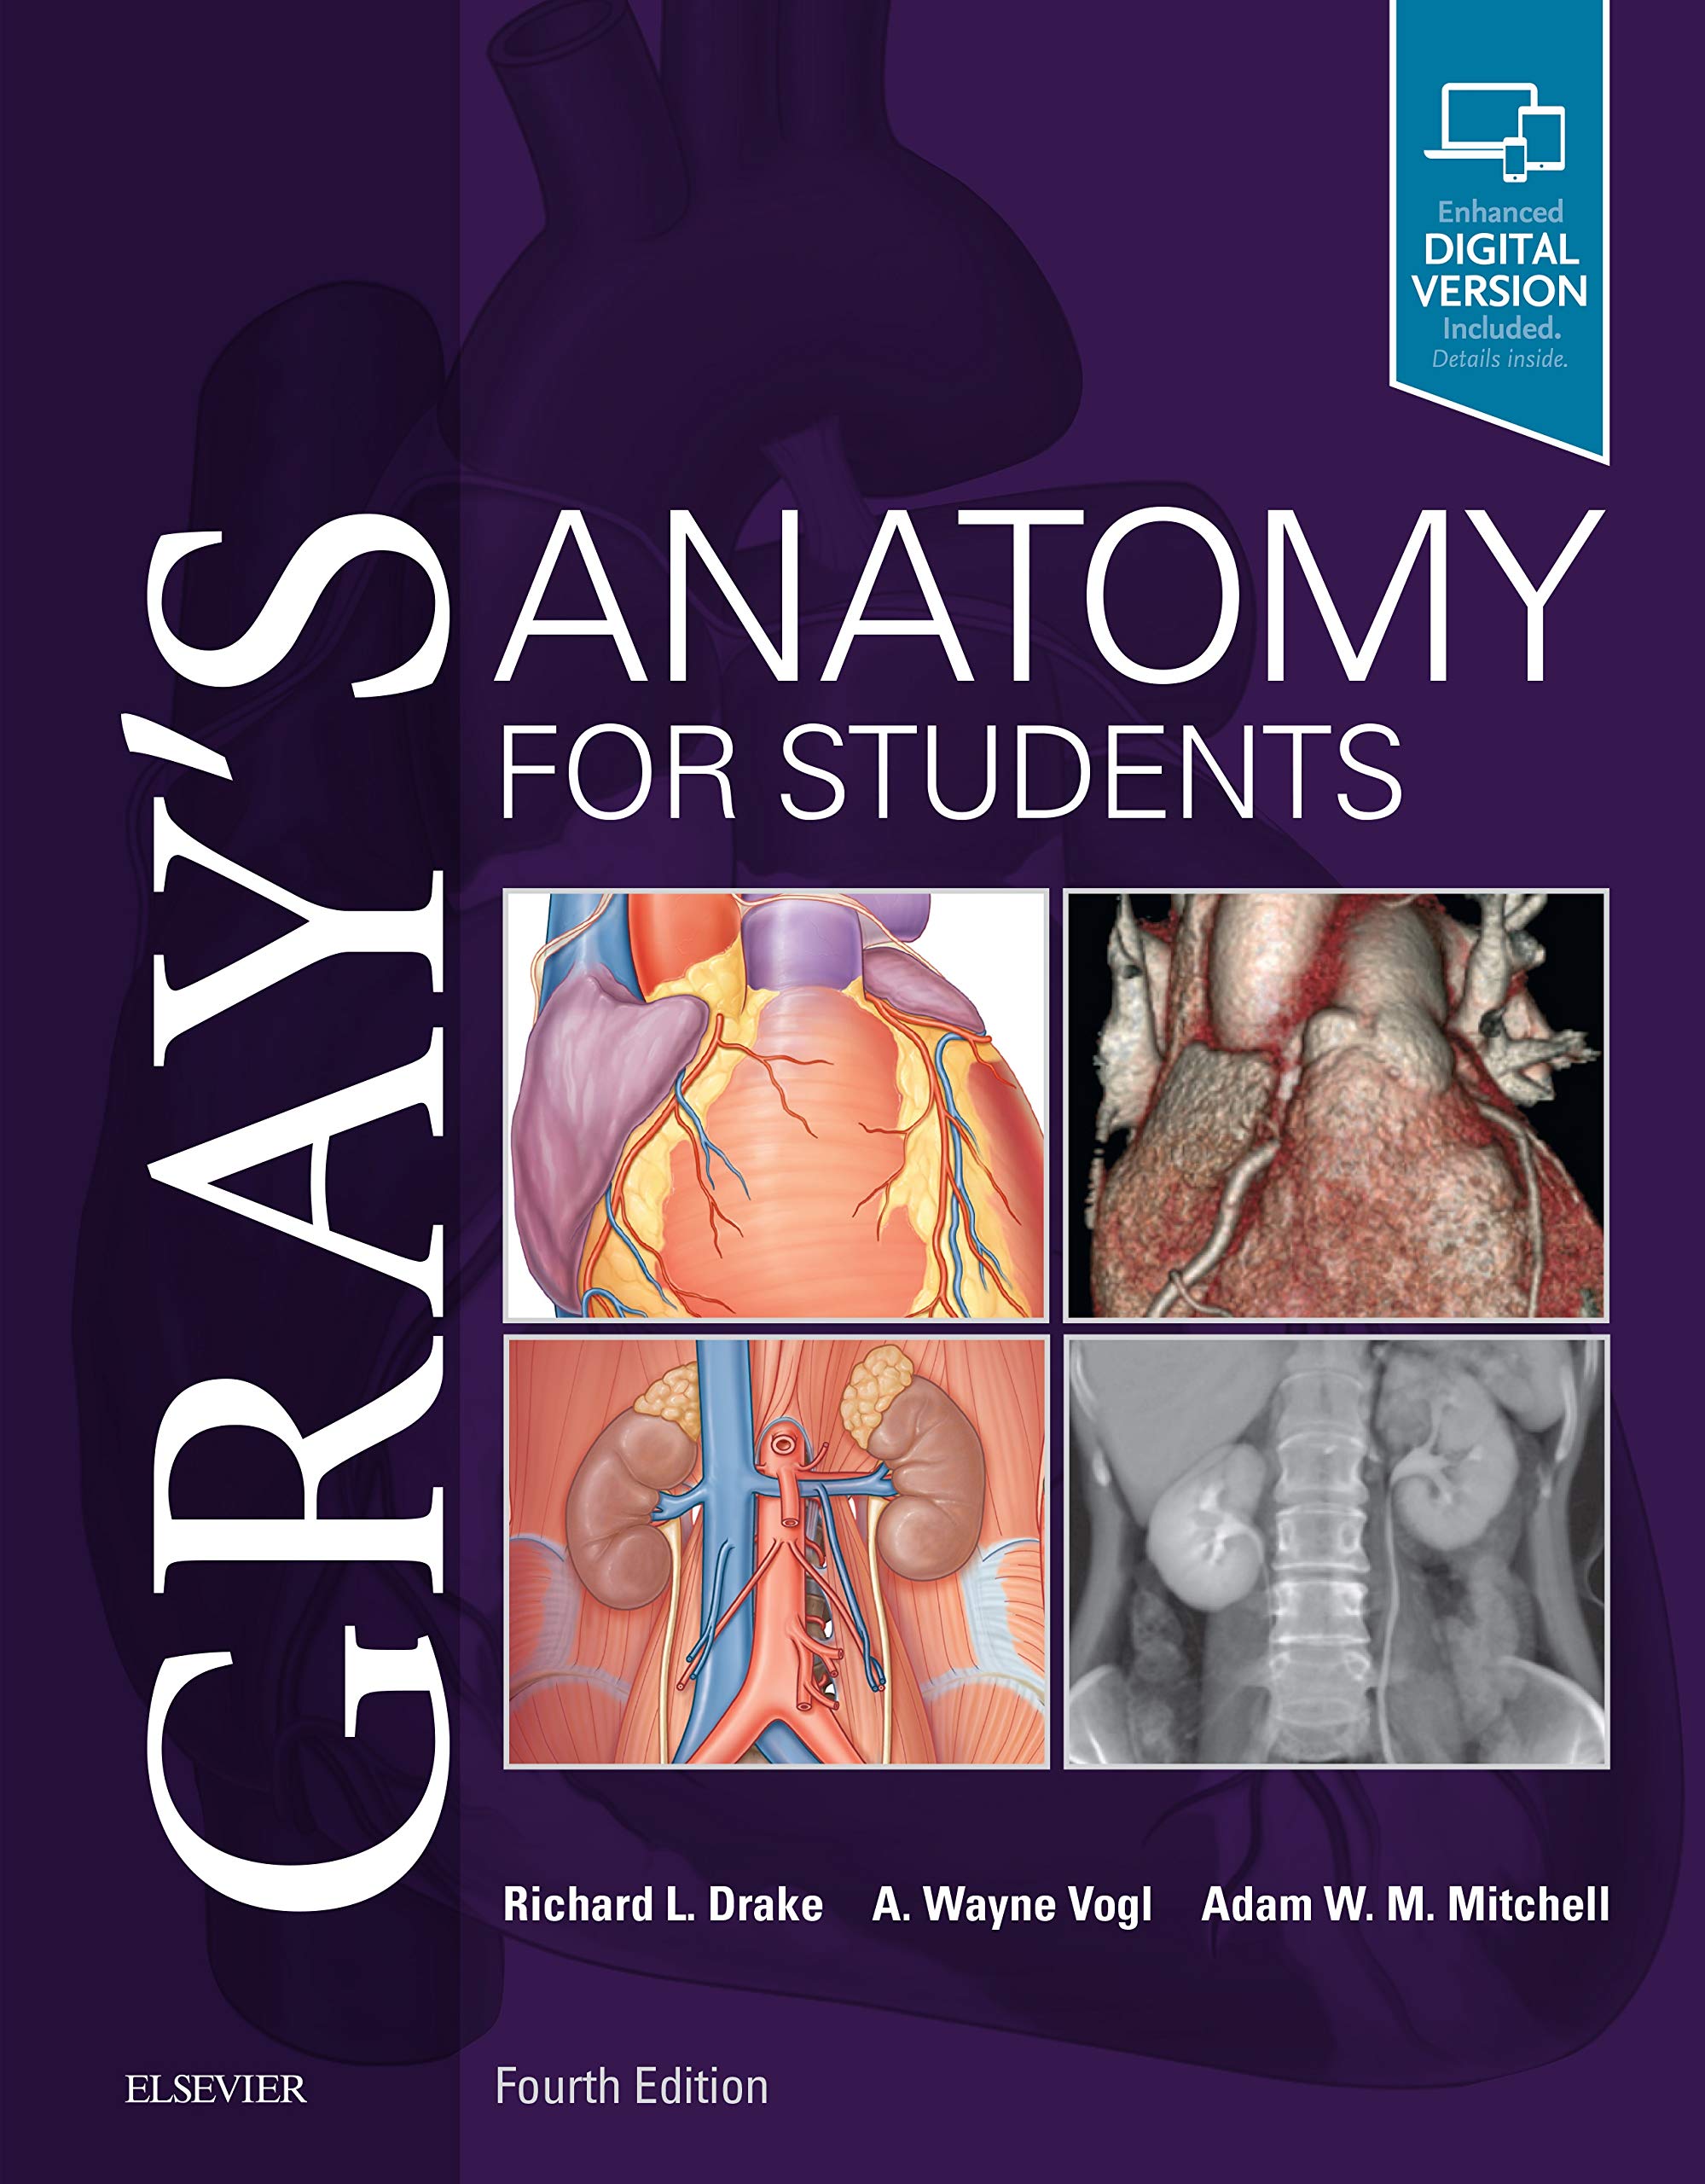 Gray's Anatomy for Students PDF